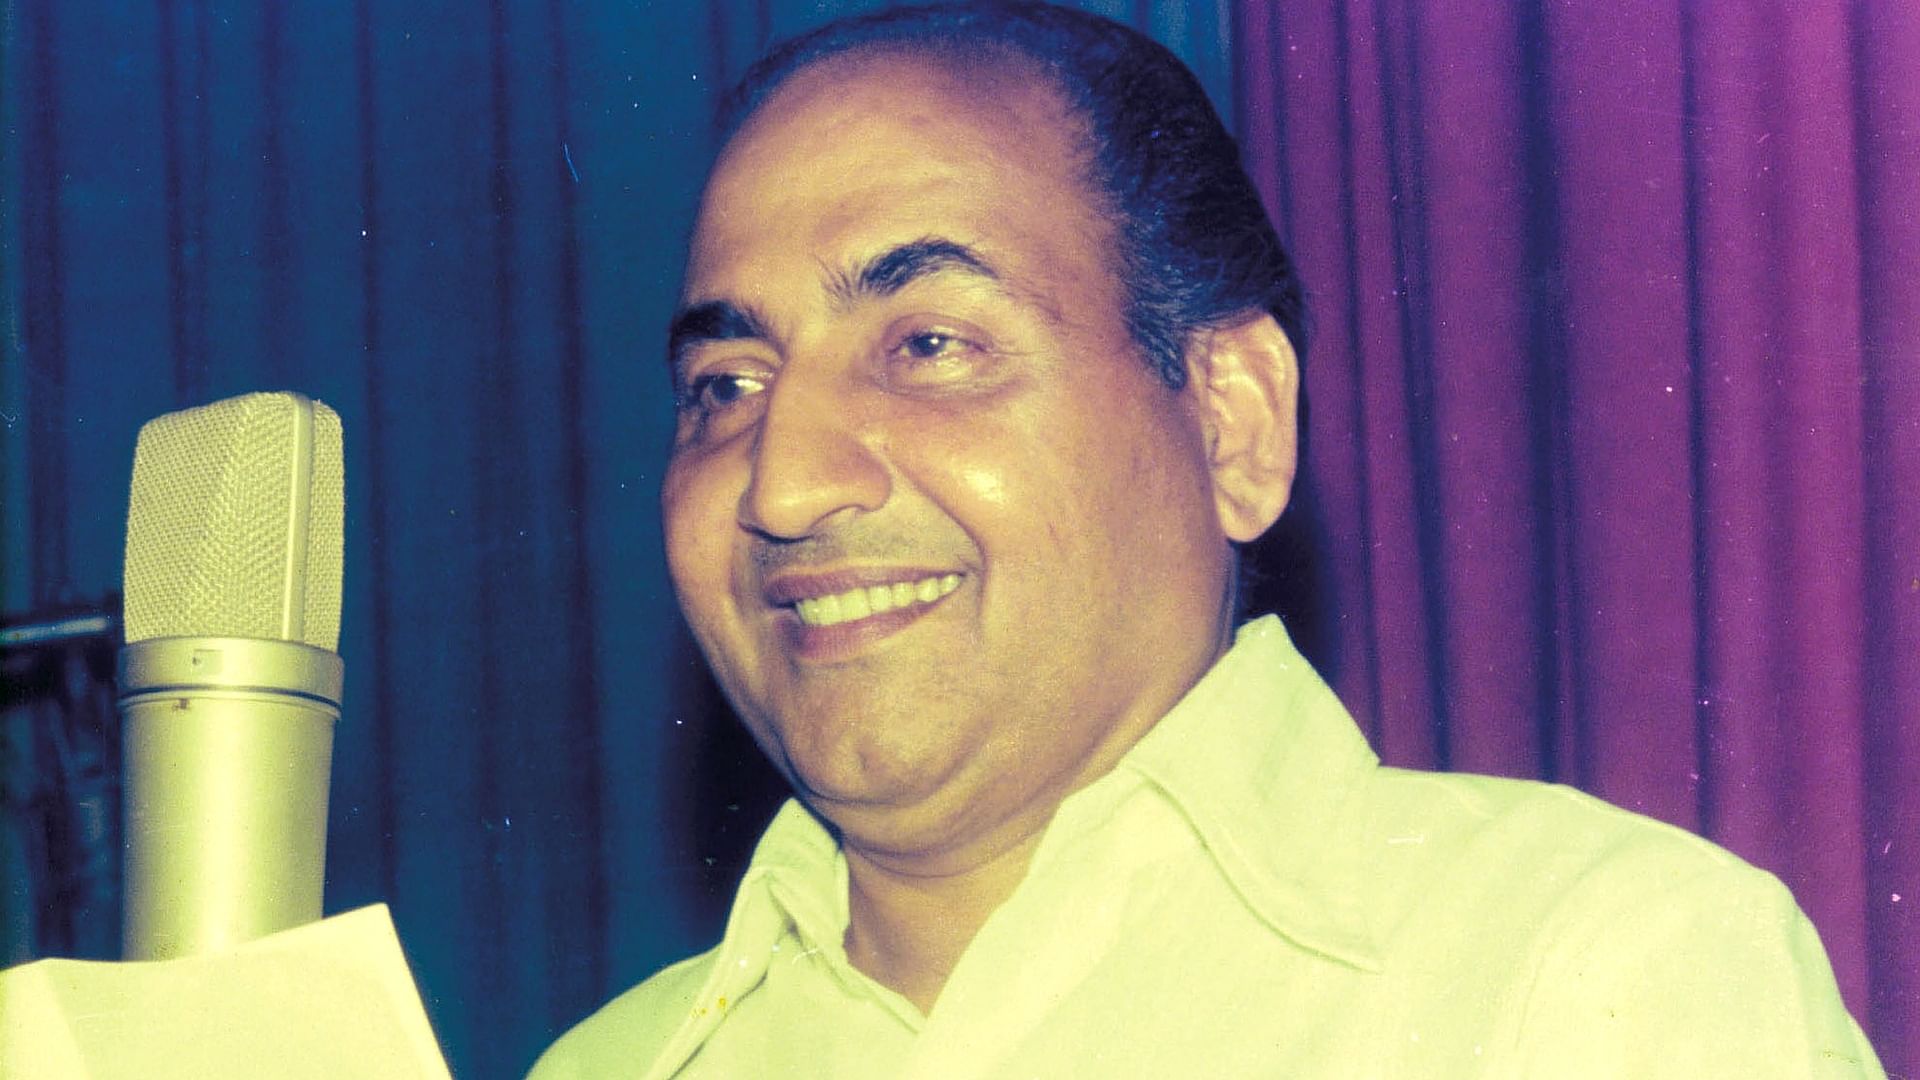 

Mohd Rafi was vintage and hip with equal charm. (Photo courtesy: Twitter/ @<a href="https://twitter.com/search?f=images&amp;vertical=default&amp;q=mohammad%20rafi&amp;src=typd">bollybubble</a>)